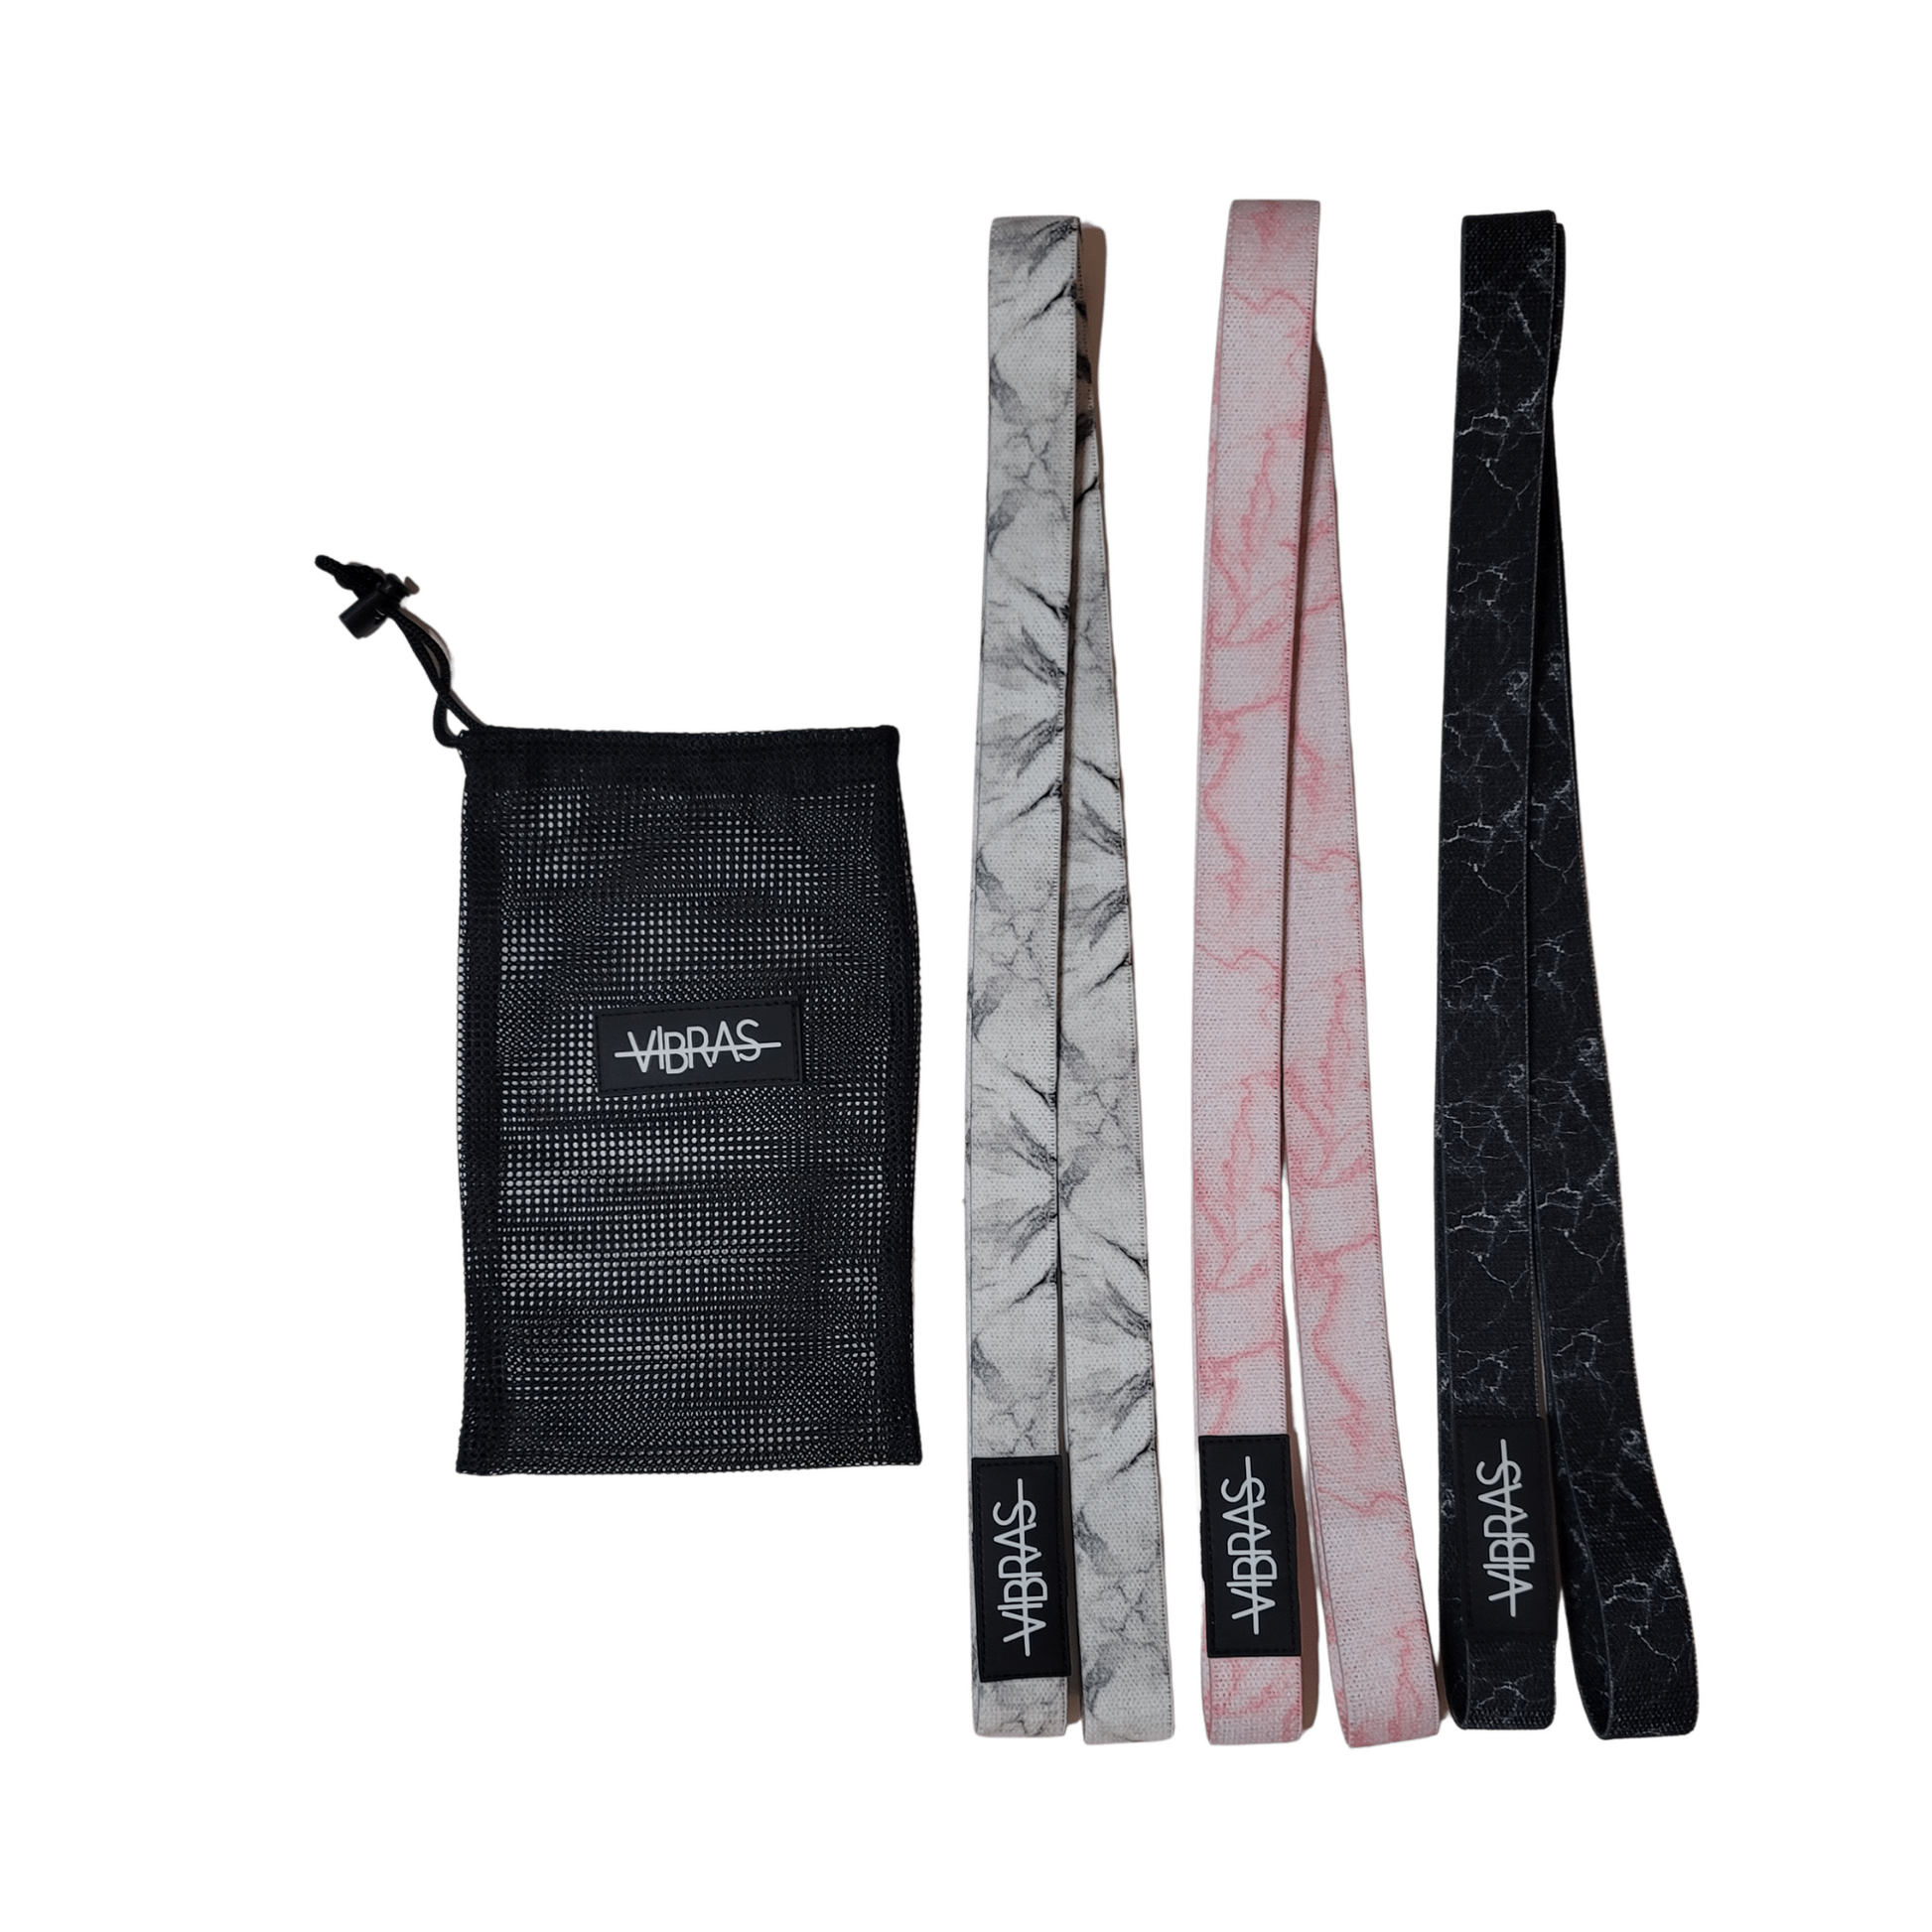 A set of three marble long and loop resistance bands  with a small mesh bag from vibras on a white background